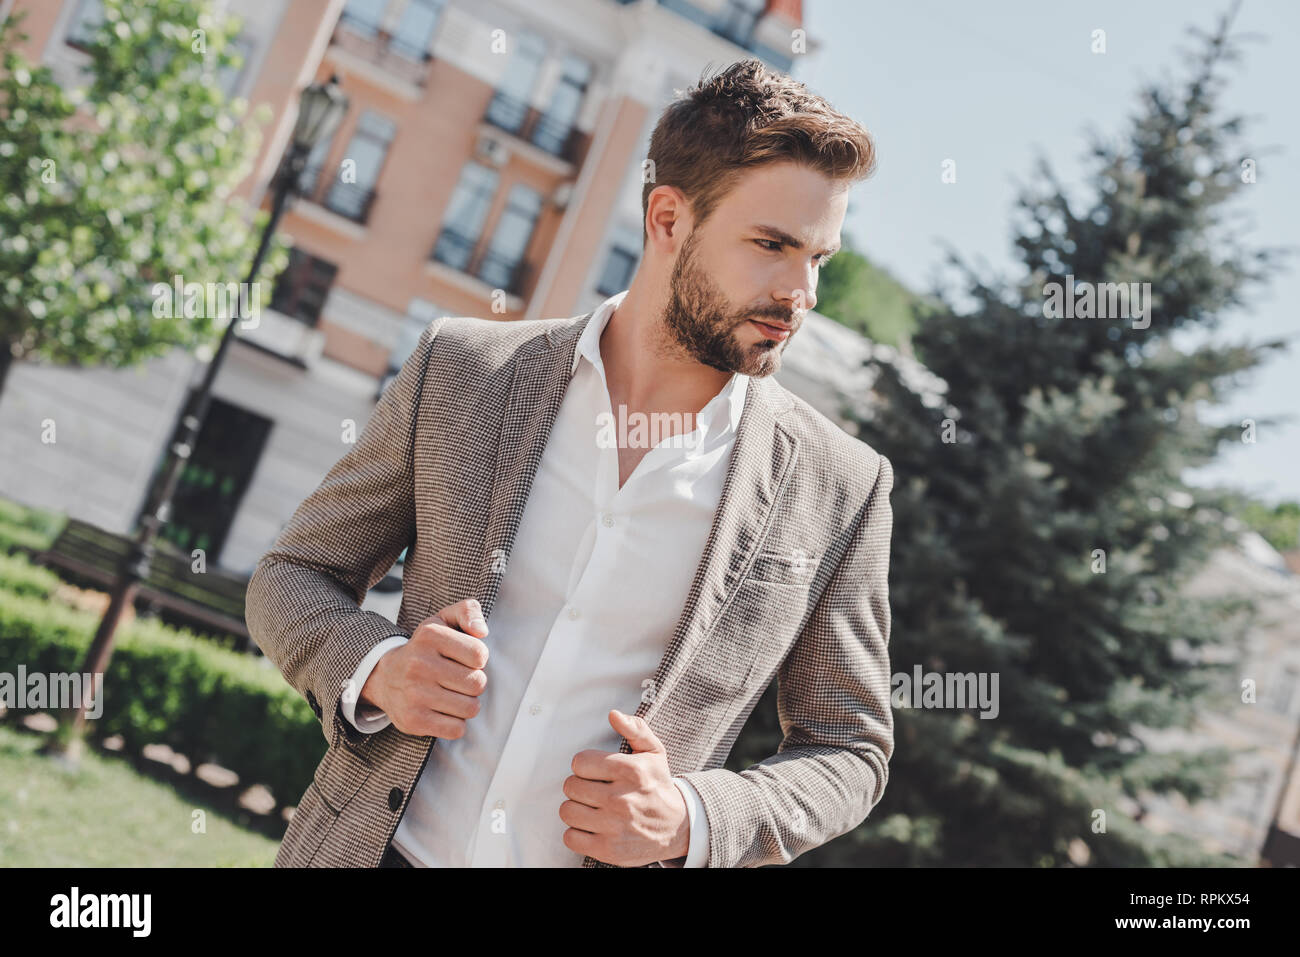 Handsome young businessman walking on city street in the morning going to work in office wear smart casual outfit of brown jacket and white shirt. Urban lifestyle of young professionals. Stock Photo